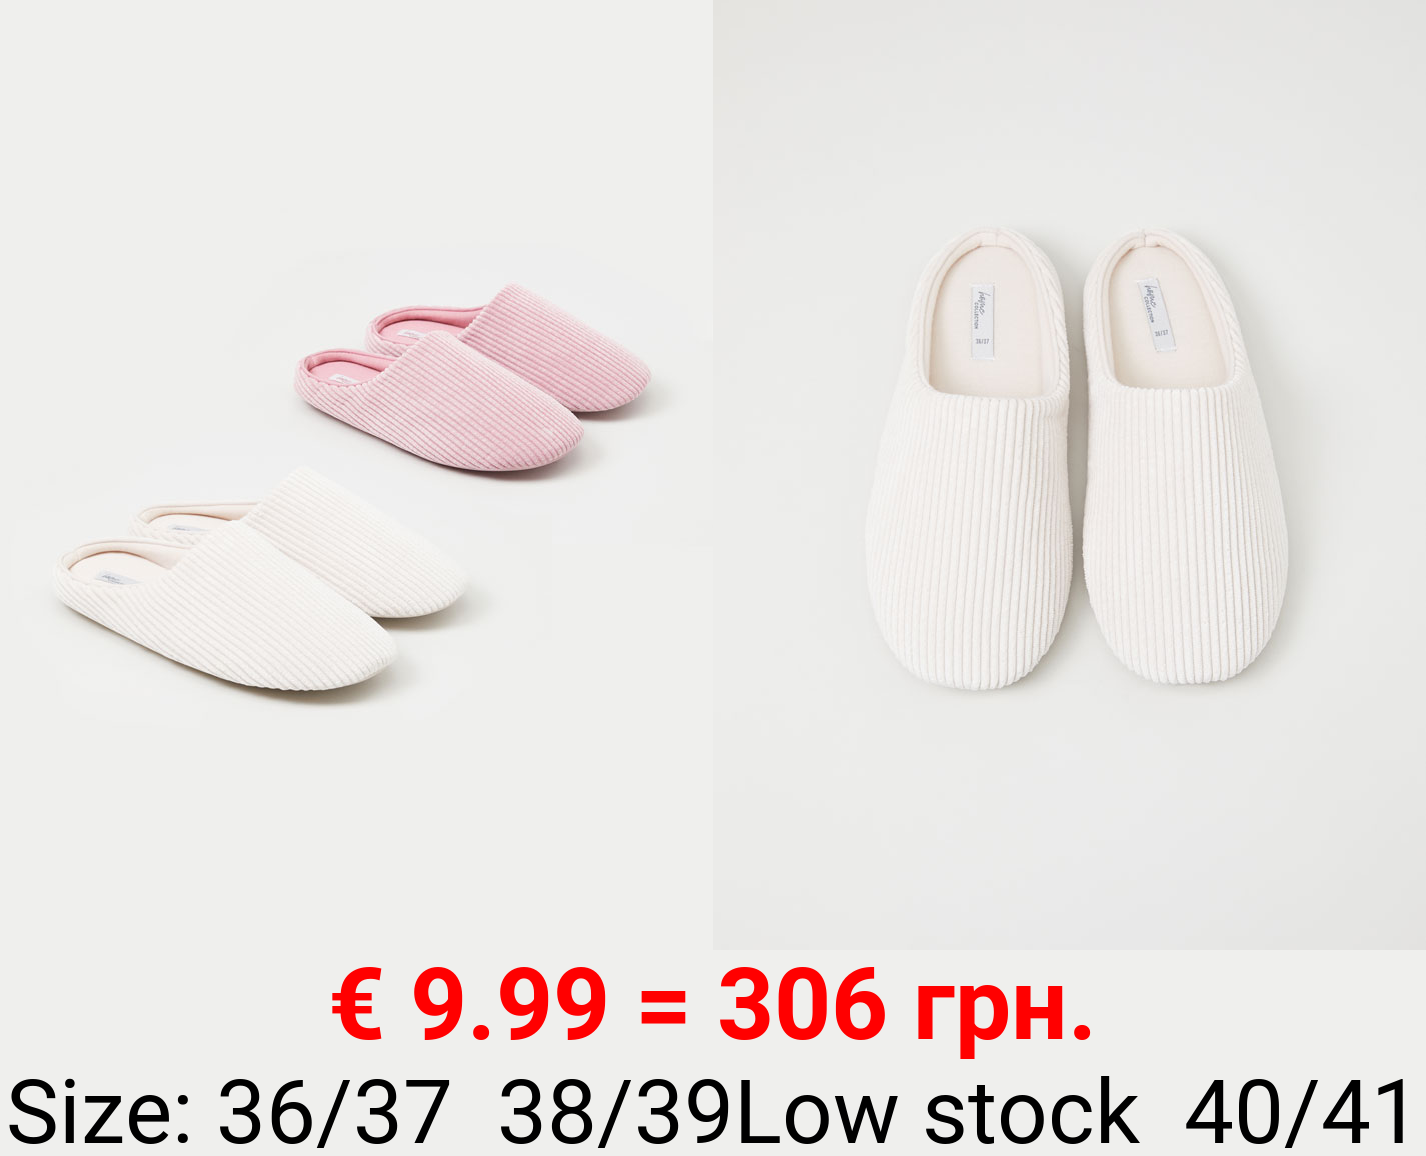 Pack of 2 house slippers